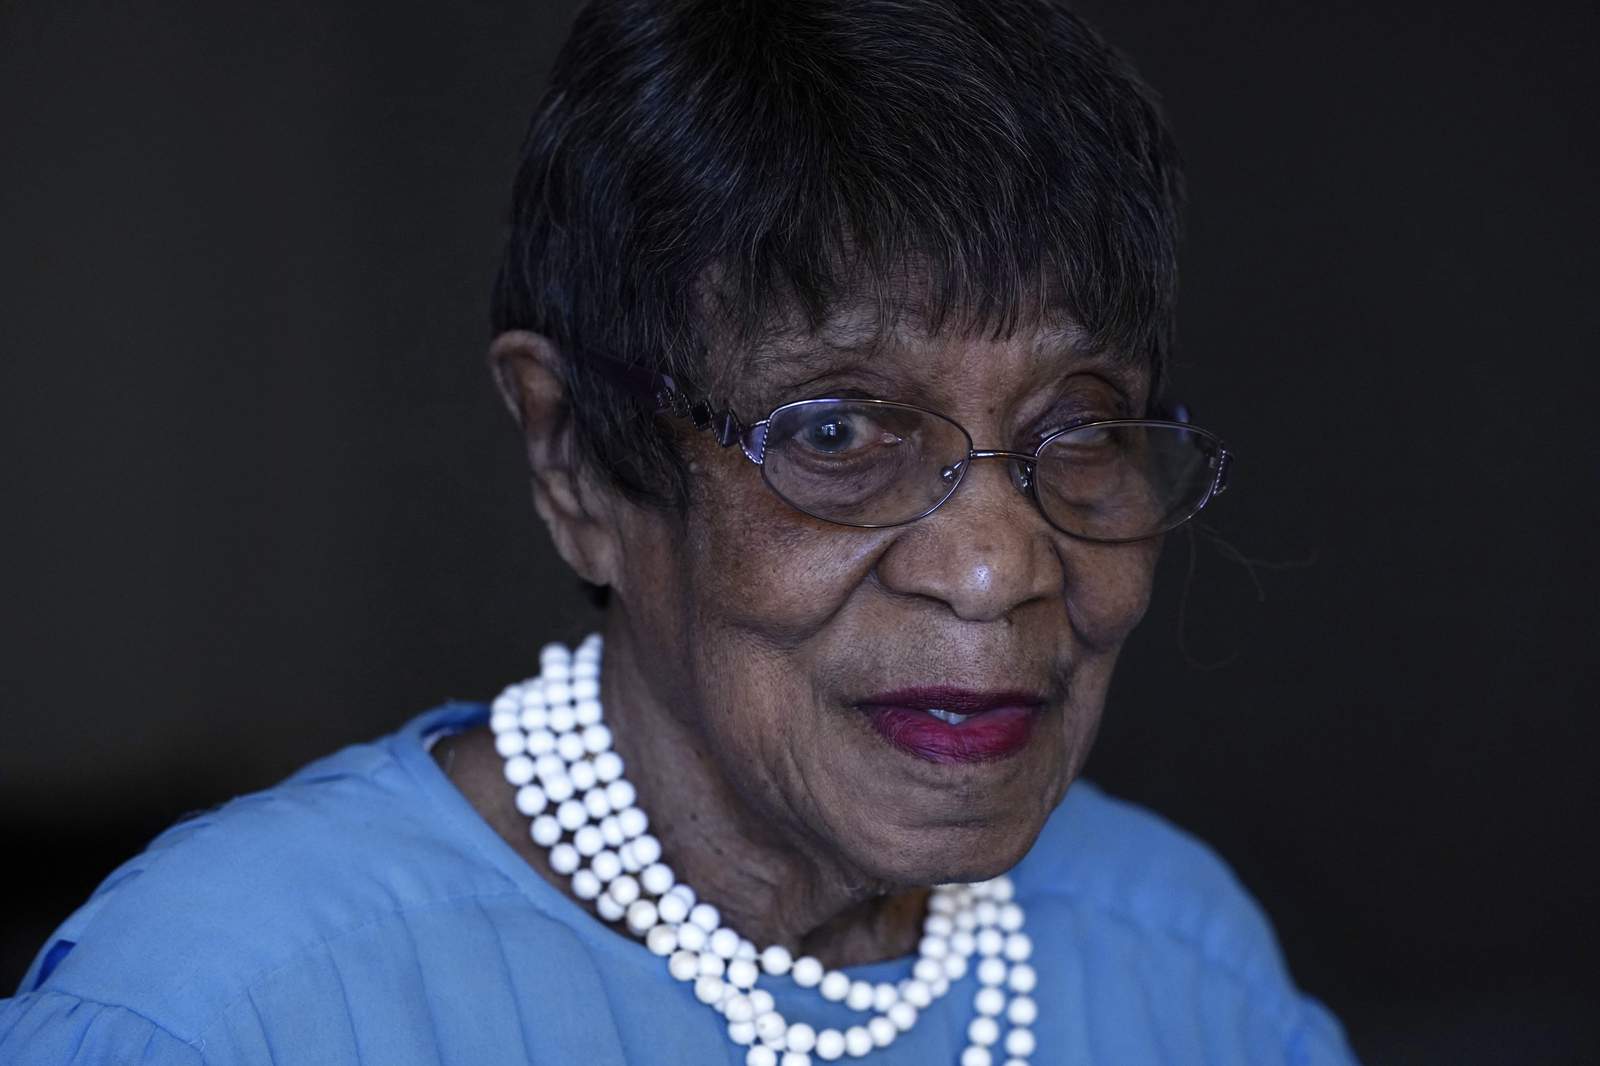 Voting history of Detroit woman, 103, dates back to FDR